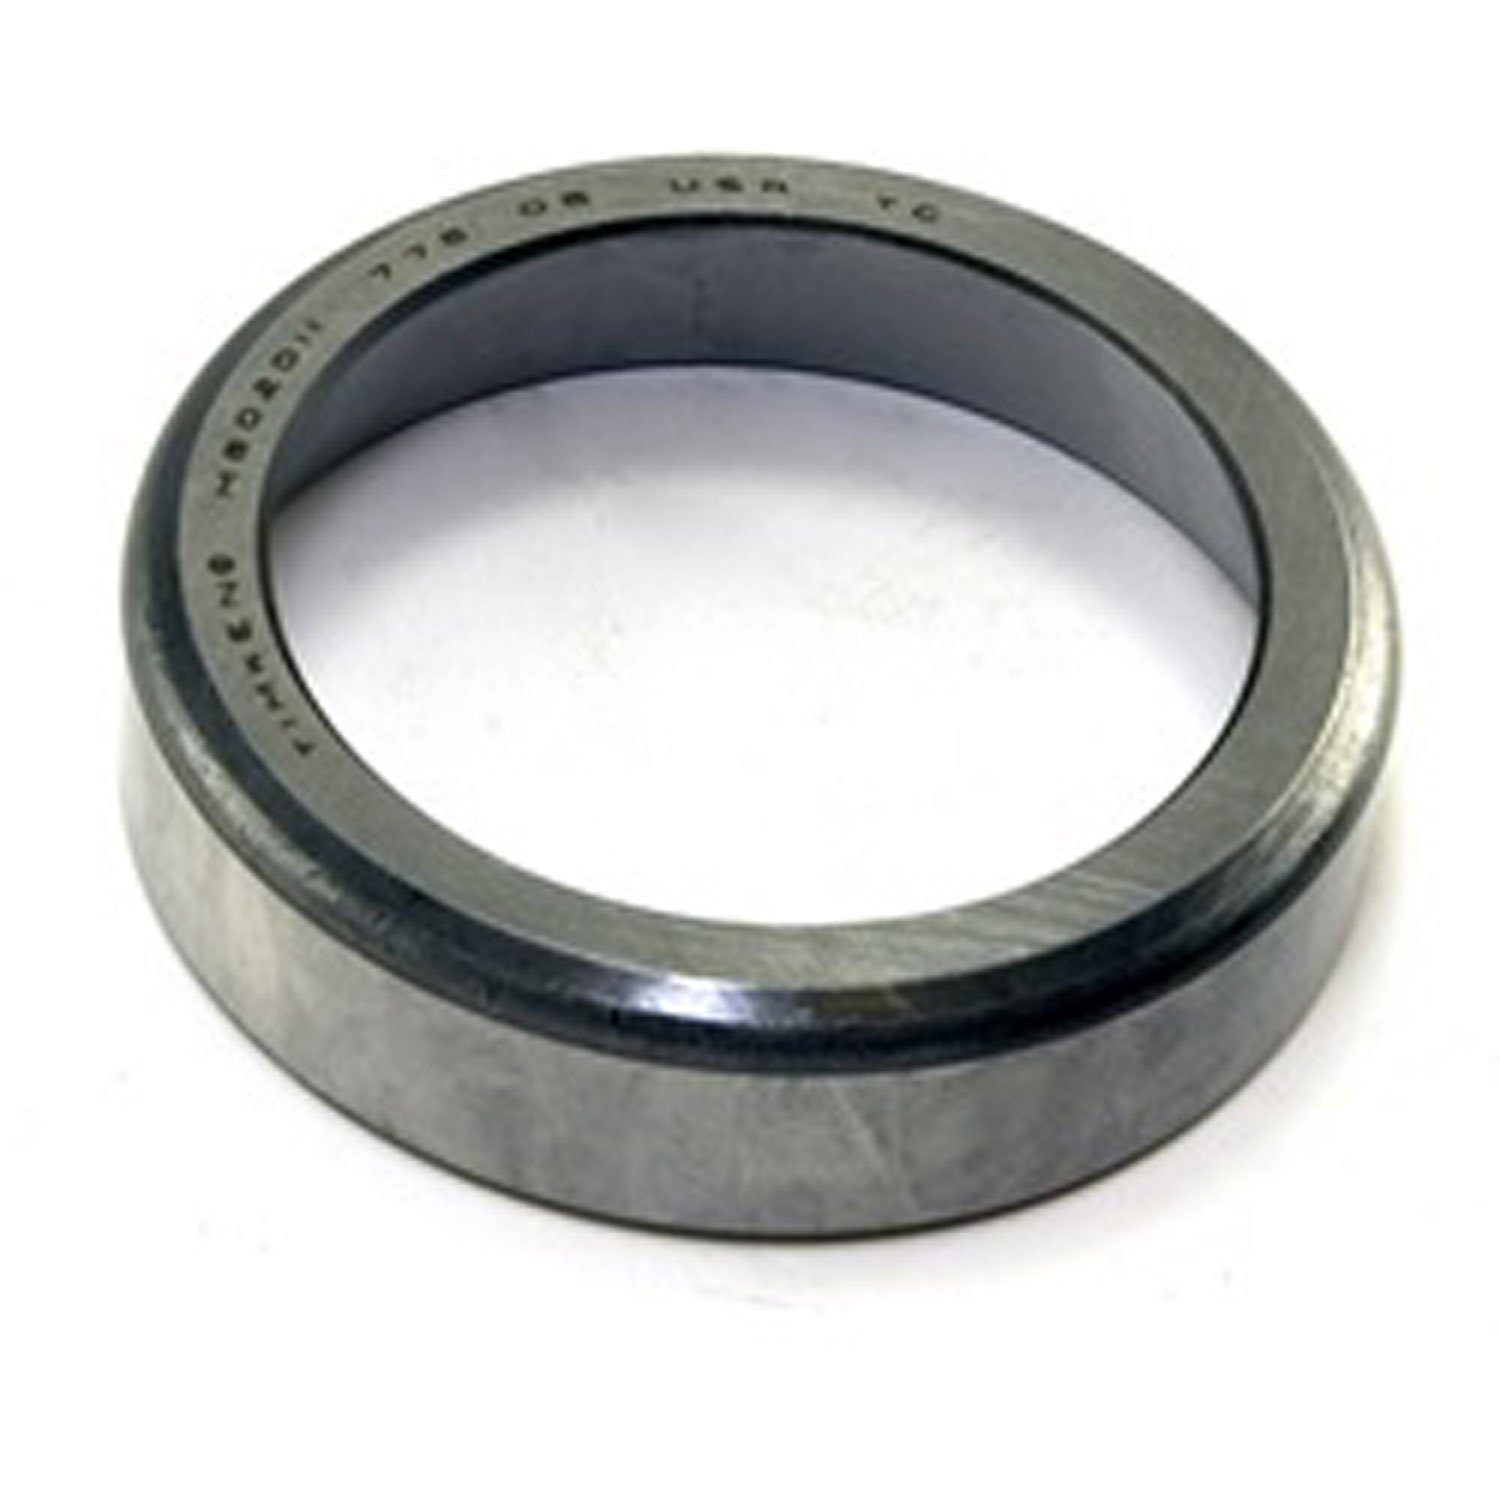 This inner pinion bearing race cup fits the AMC 20 rear axle found in 76-83 Jeep CJ-5s 76-86 CJ-7s and 81-86 CJ-8s.